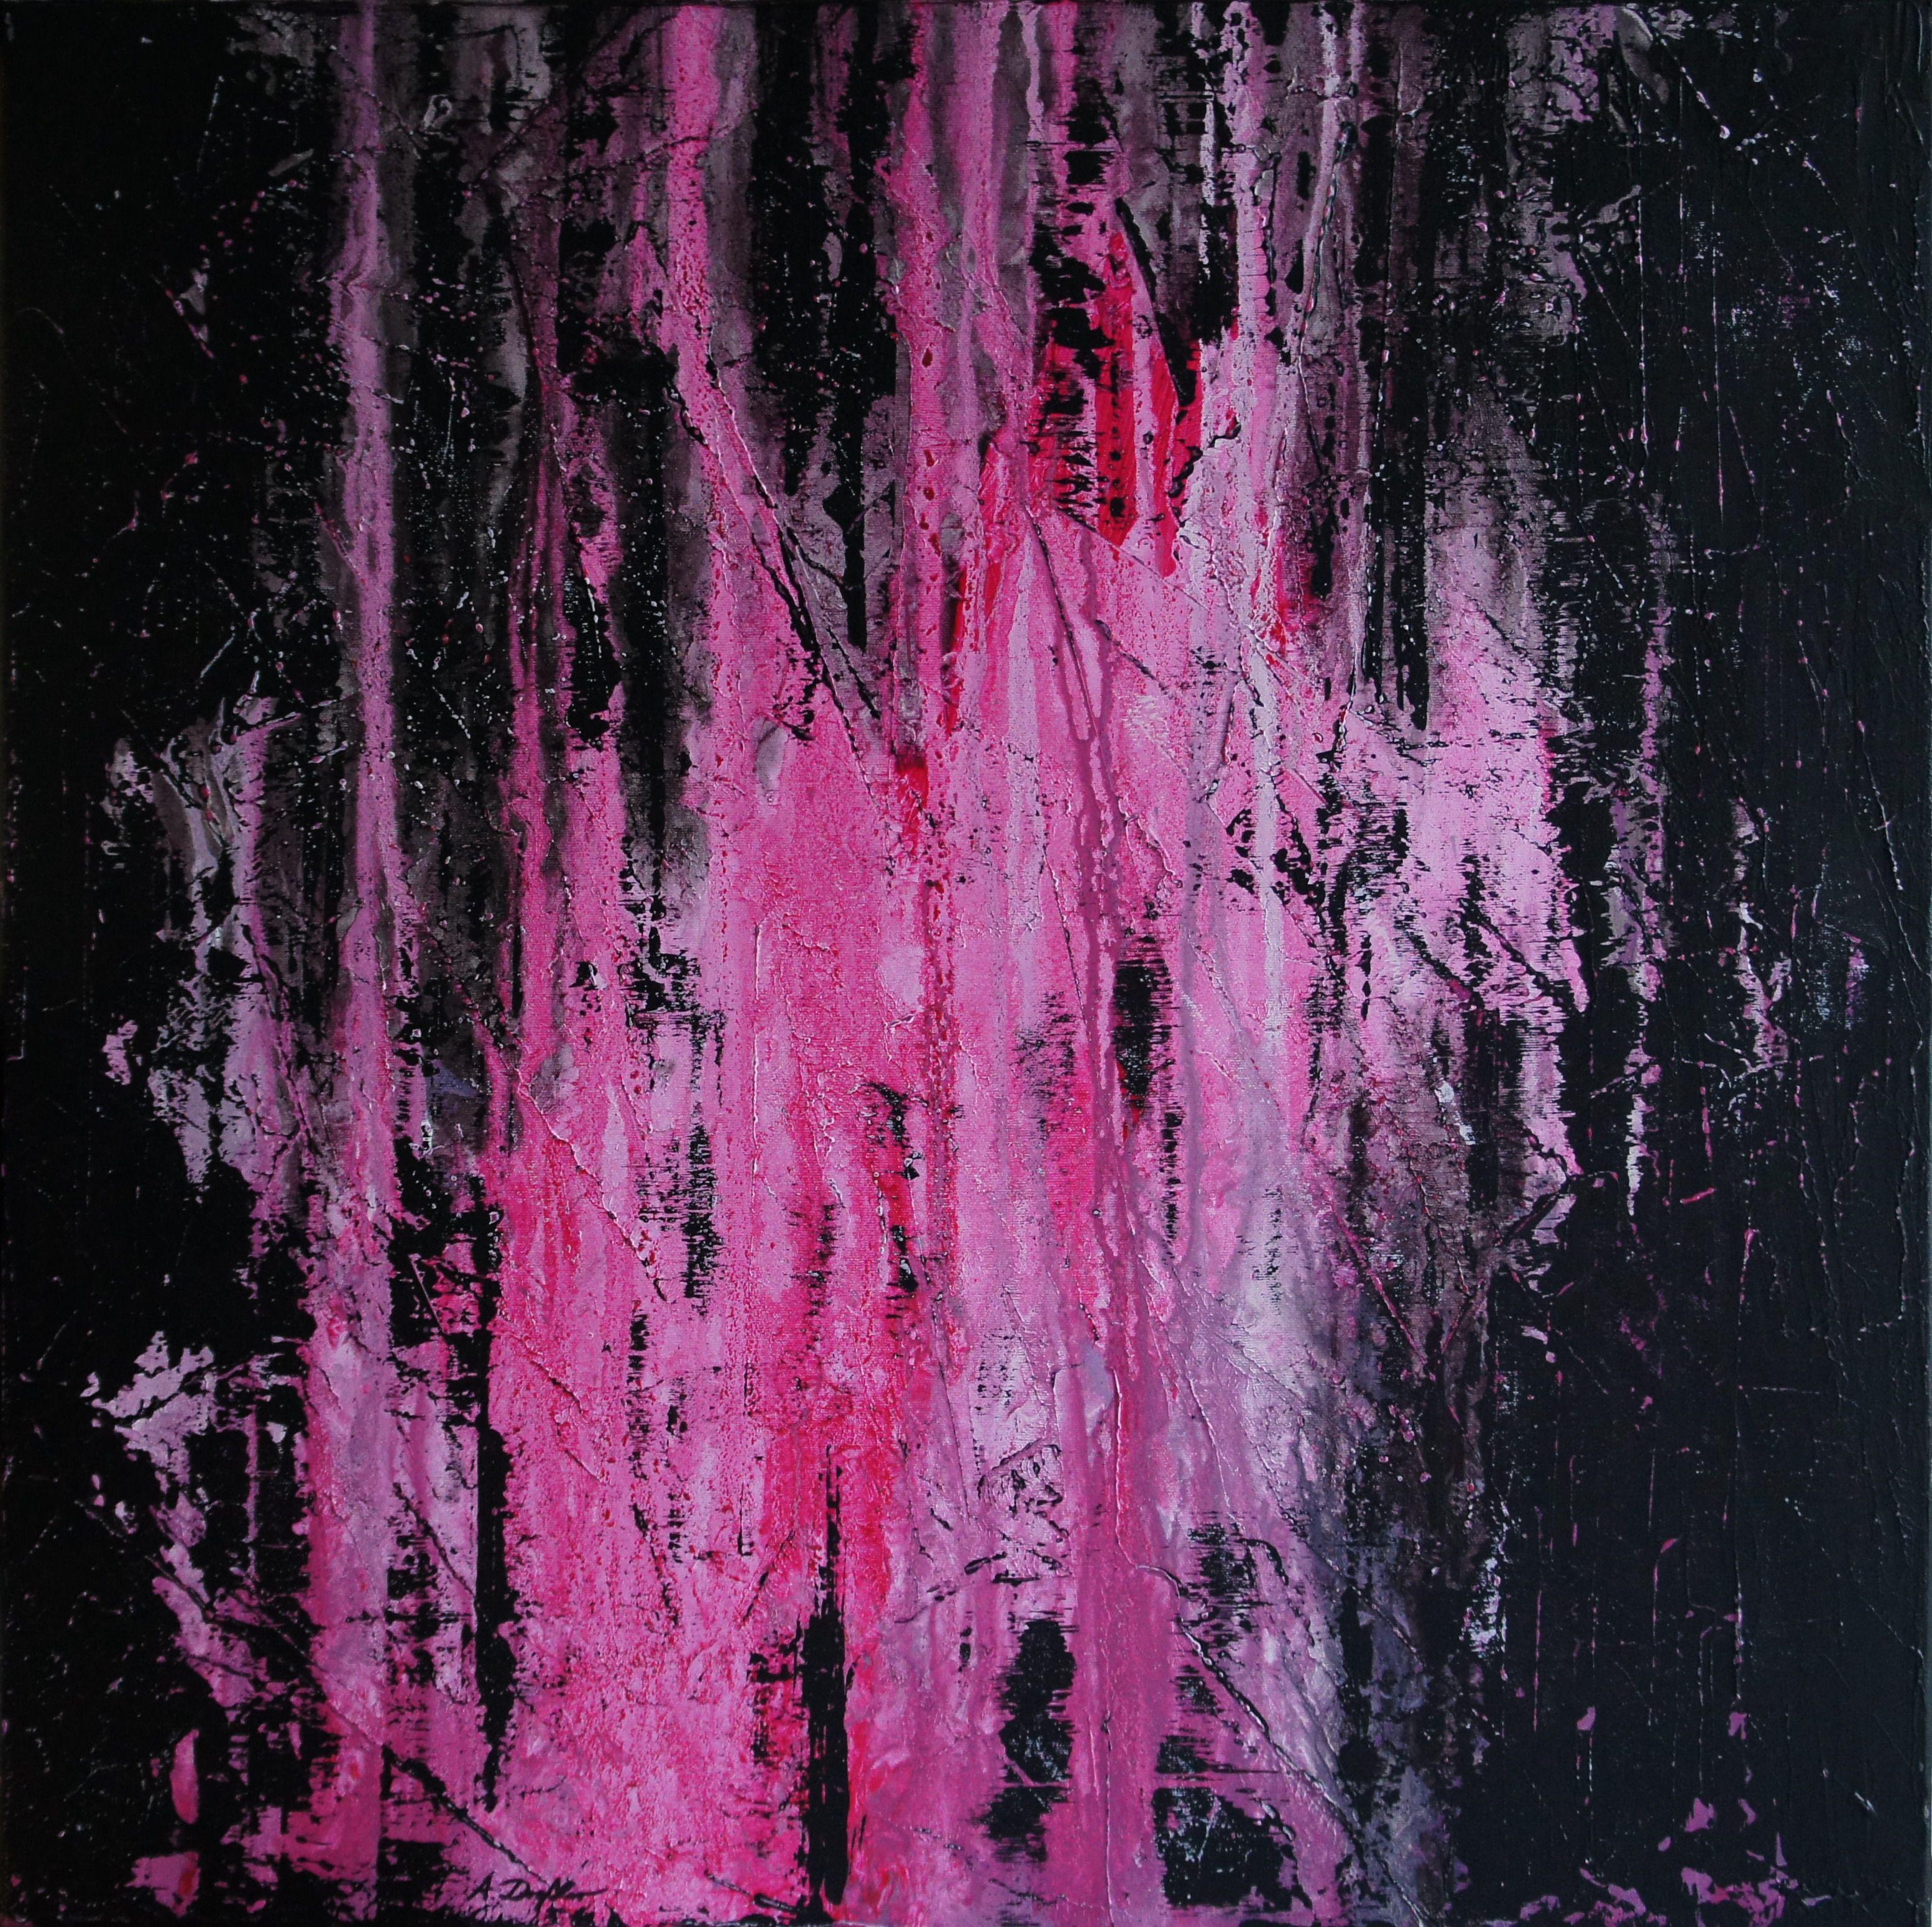 Ansgar Dressler Abstract Painting - Black 'n' Berry, Painting, Acrylic on Canvas